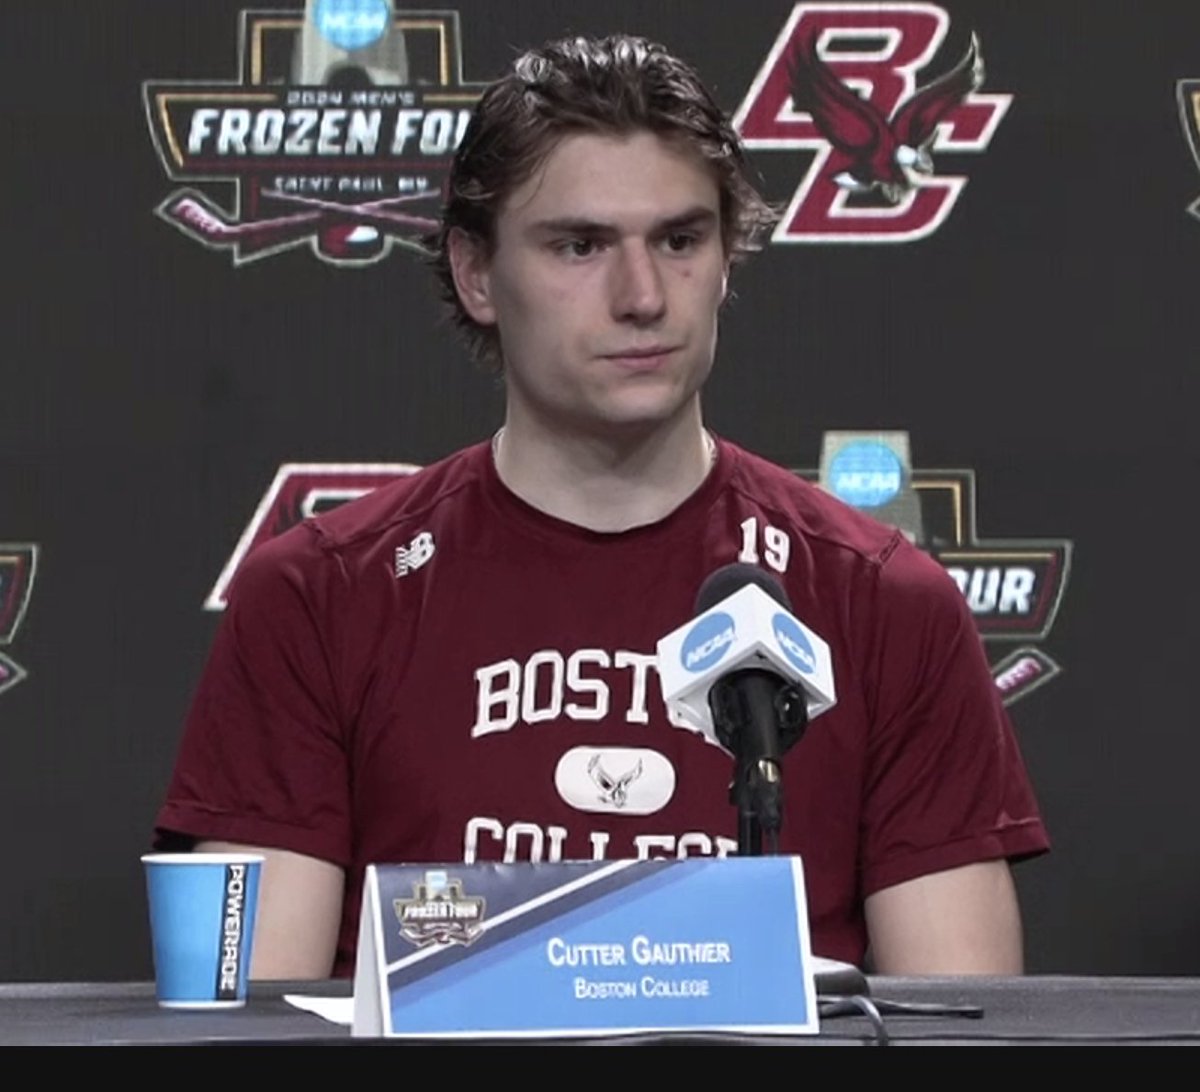 Highly Quotable Boston College SOPH Cutter Gauthier on playing for a national championship Saturday. 'When you sign on to play at BC, you are signing on to win a national championship...'